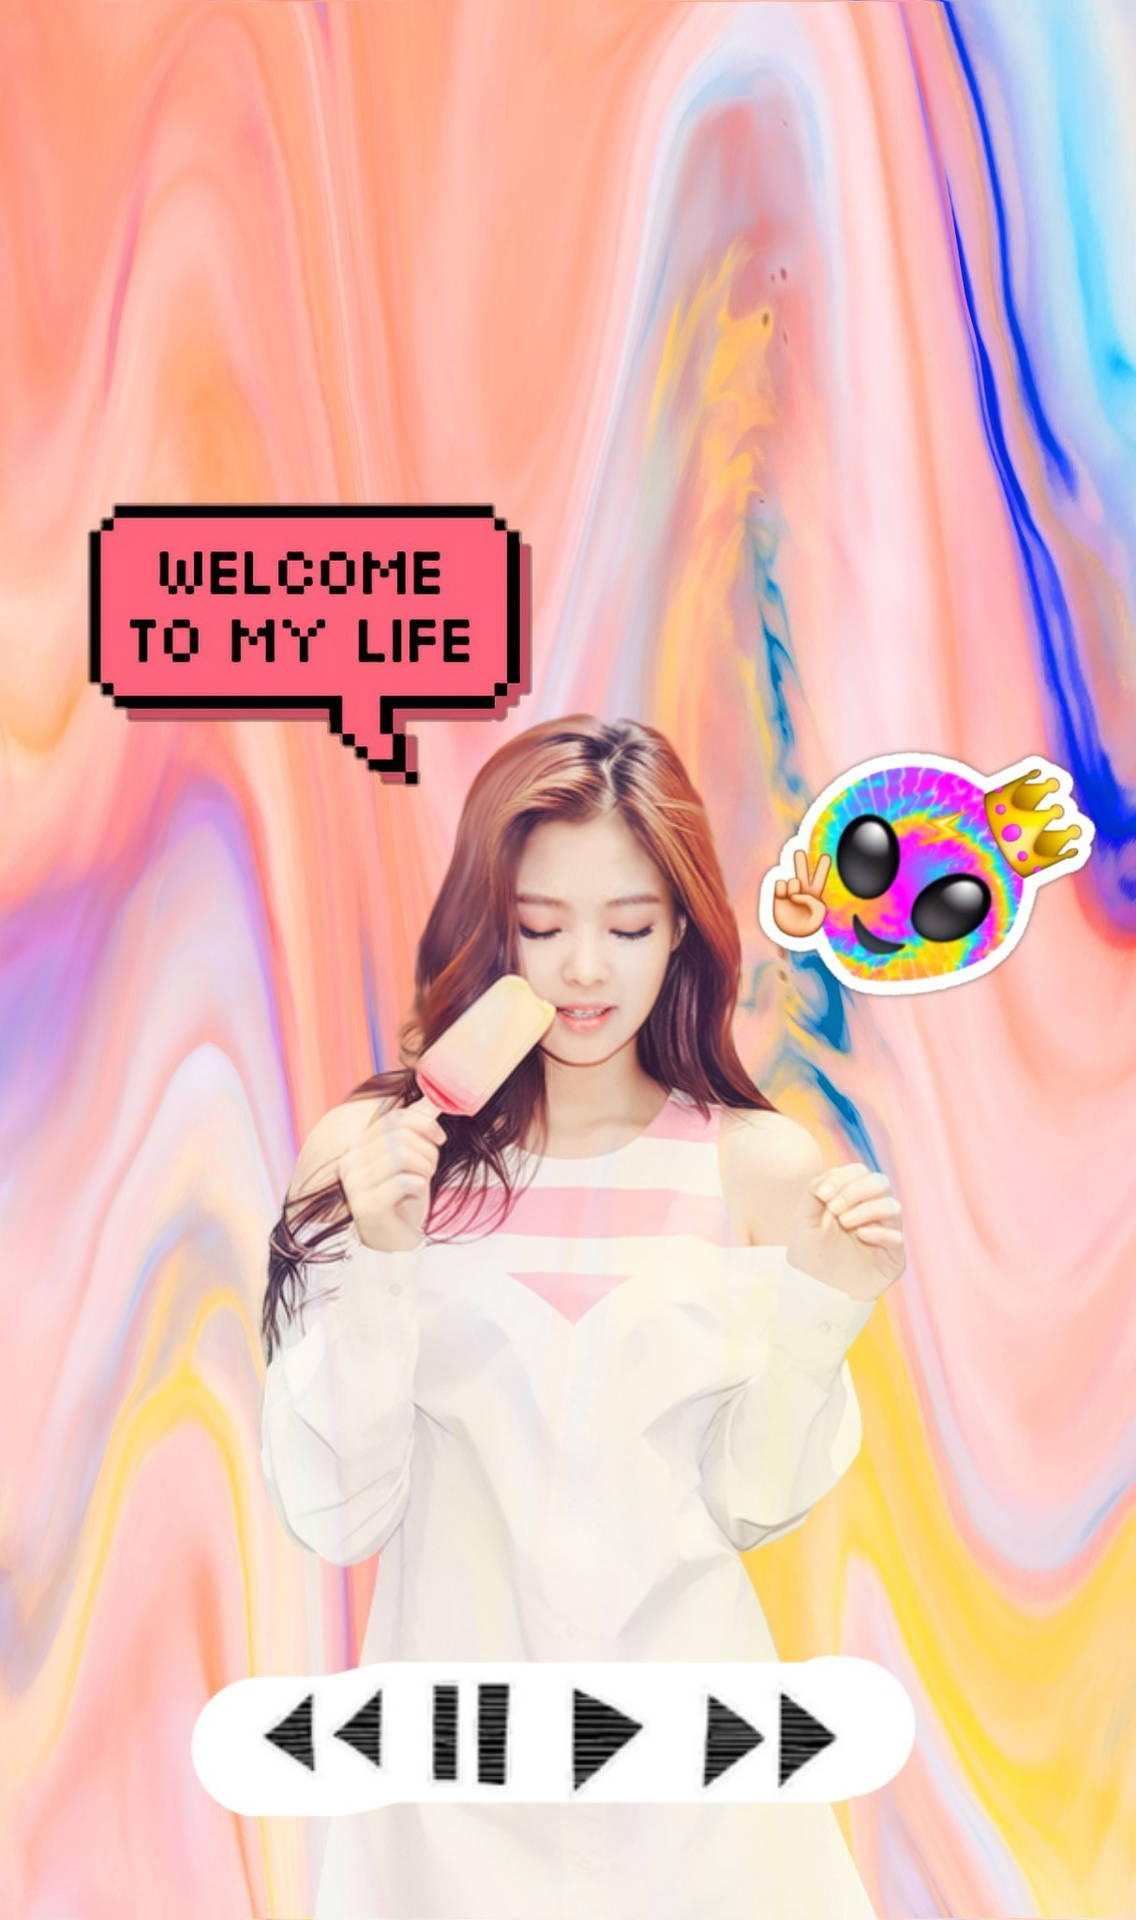 Jennie Kim Eating Popsicle Colorful Aesthetic Wallpaper